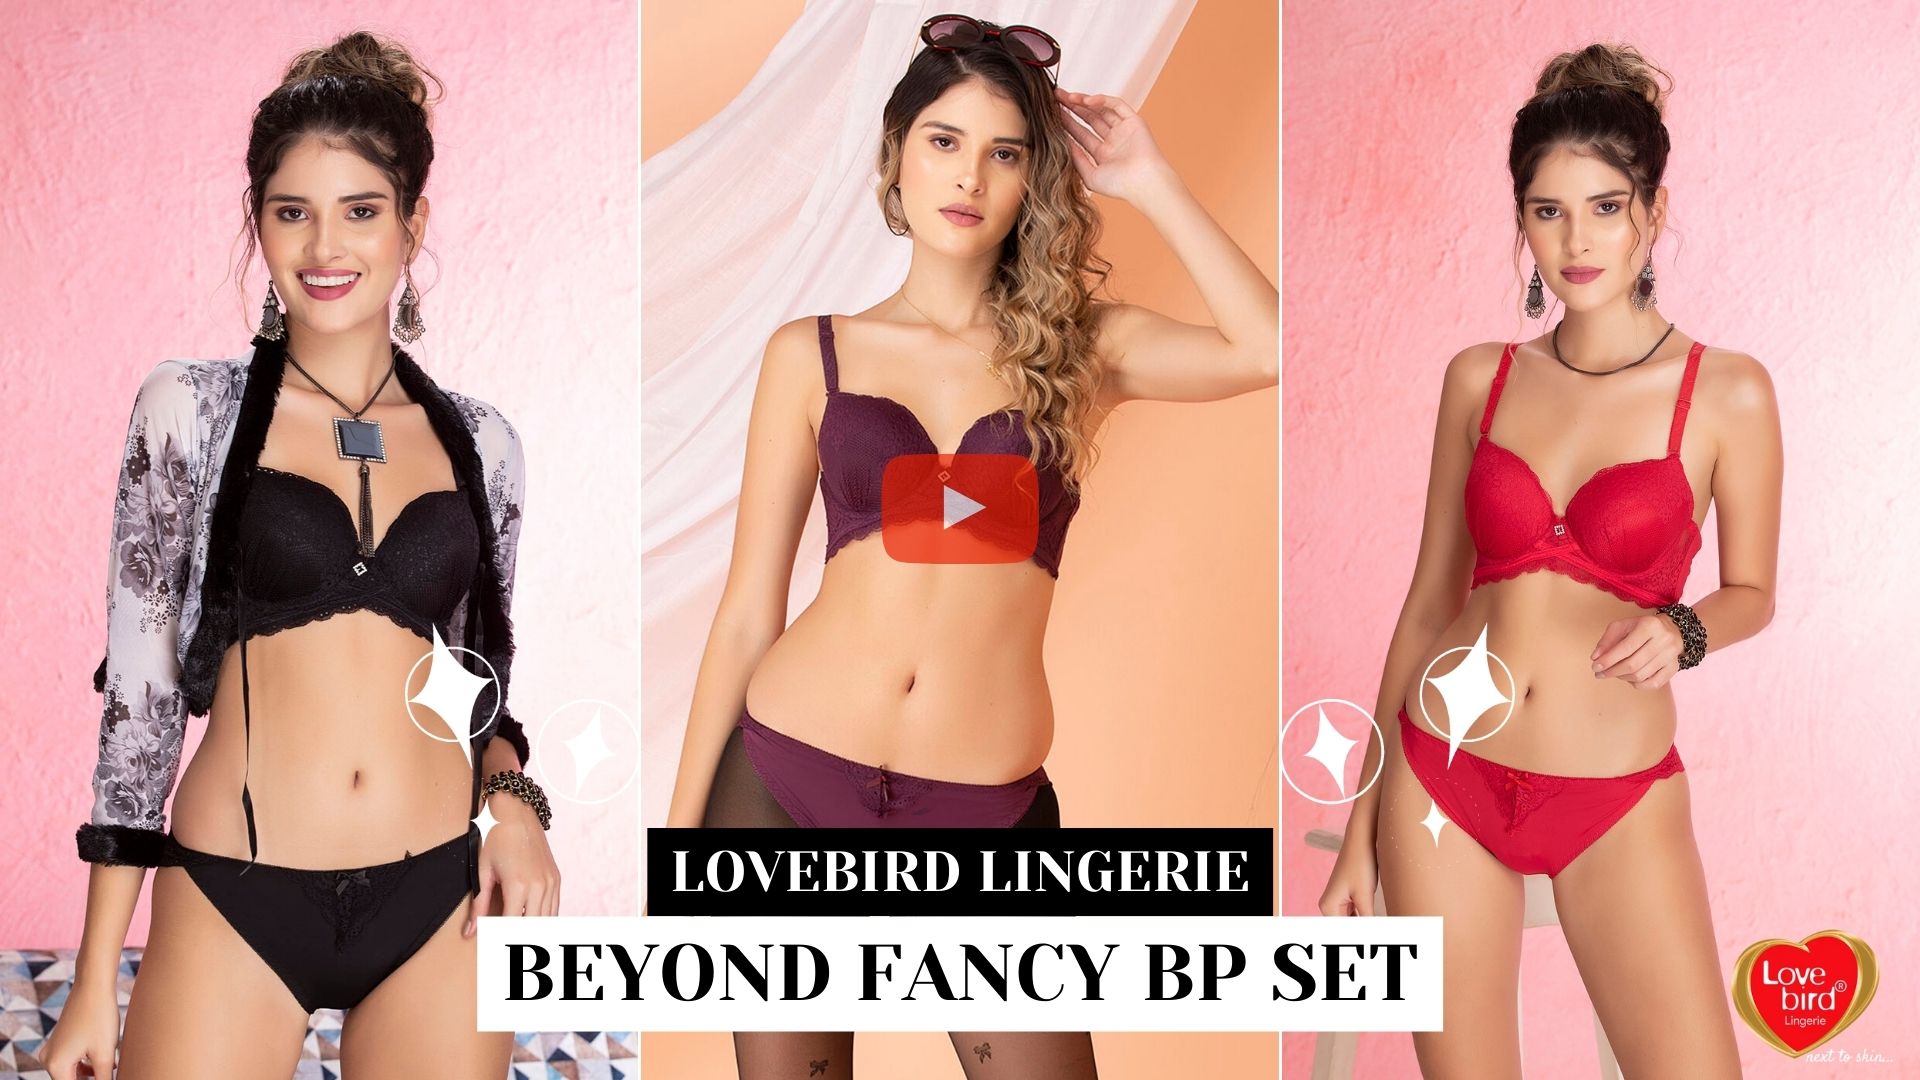 Fancy Bridal Lace Panty Bra Set at Rs 165/set, Bra and Brief Sets in Noida